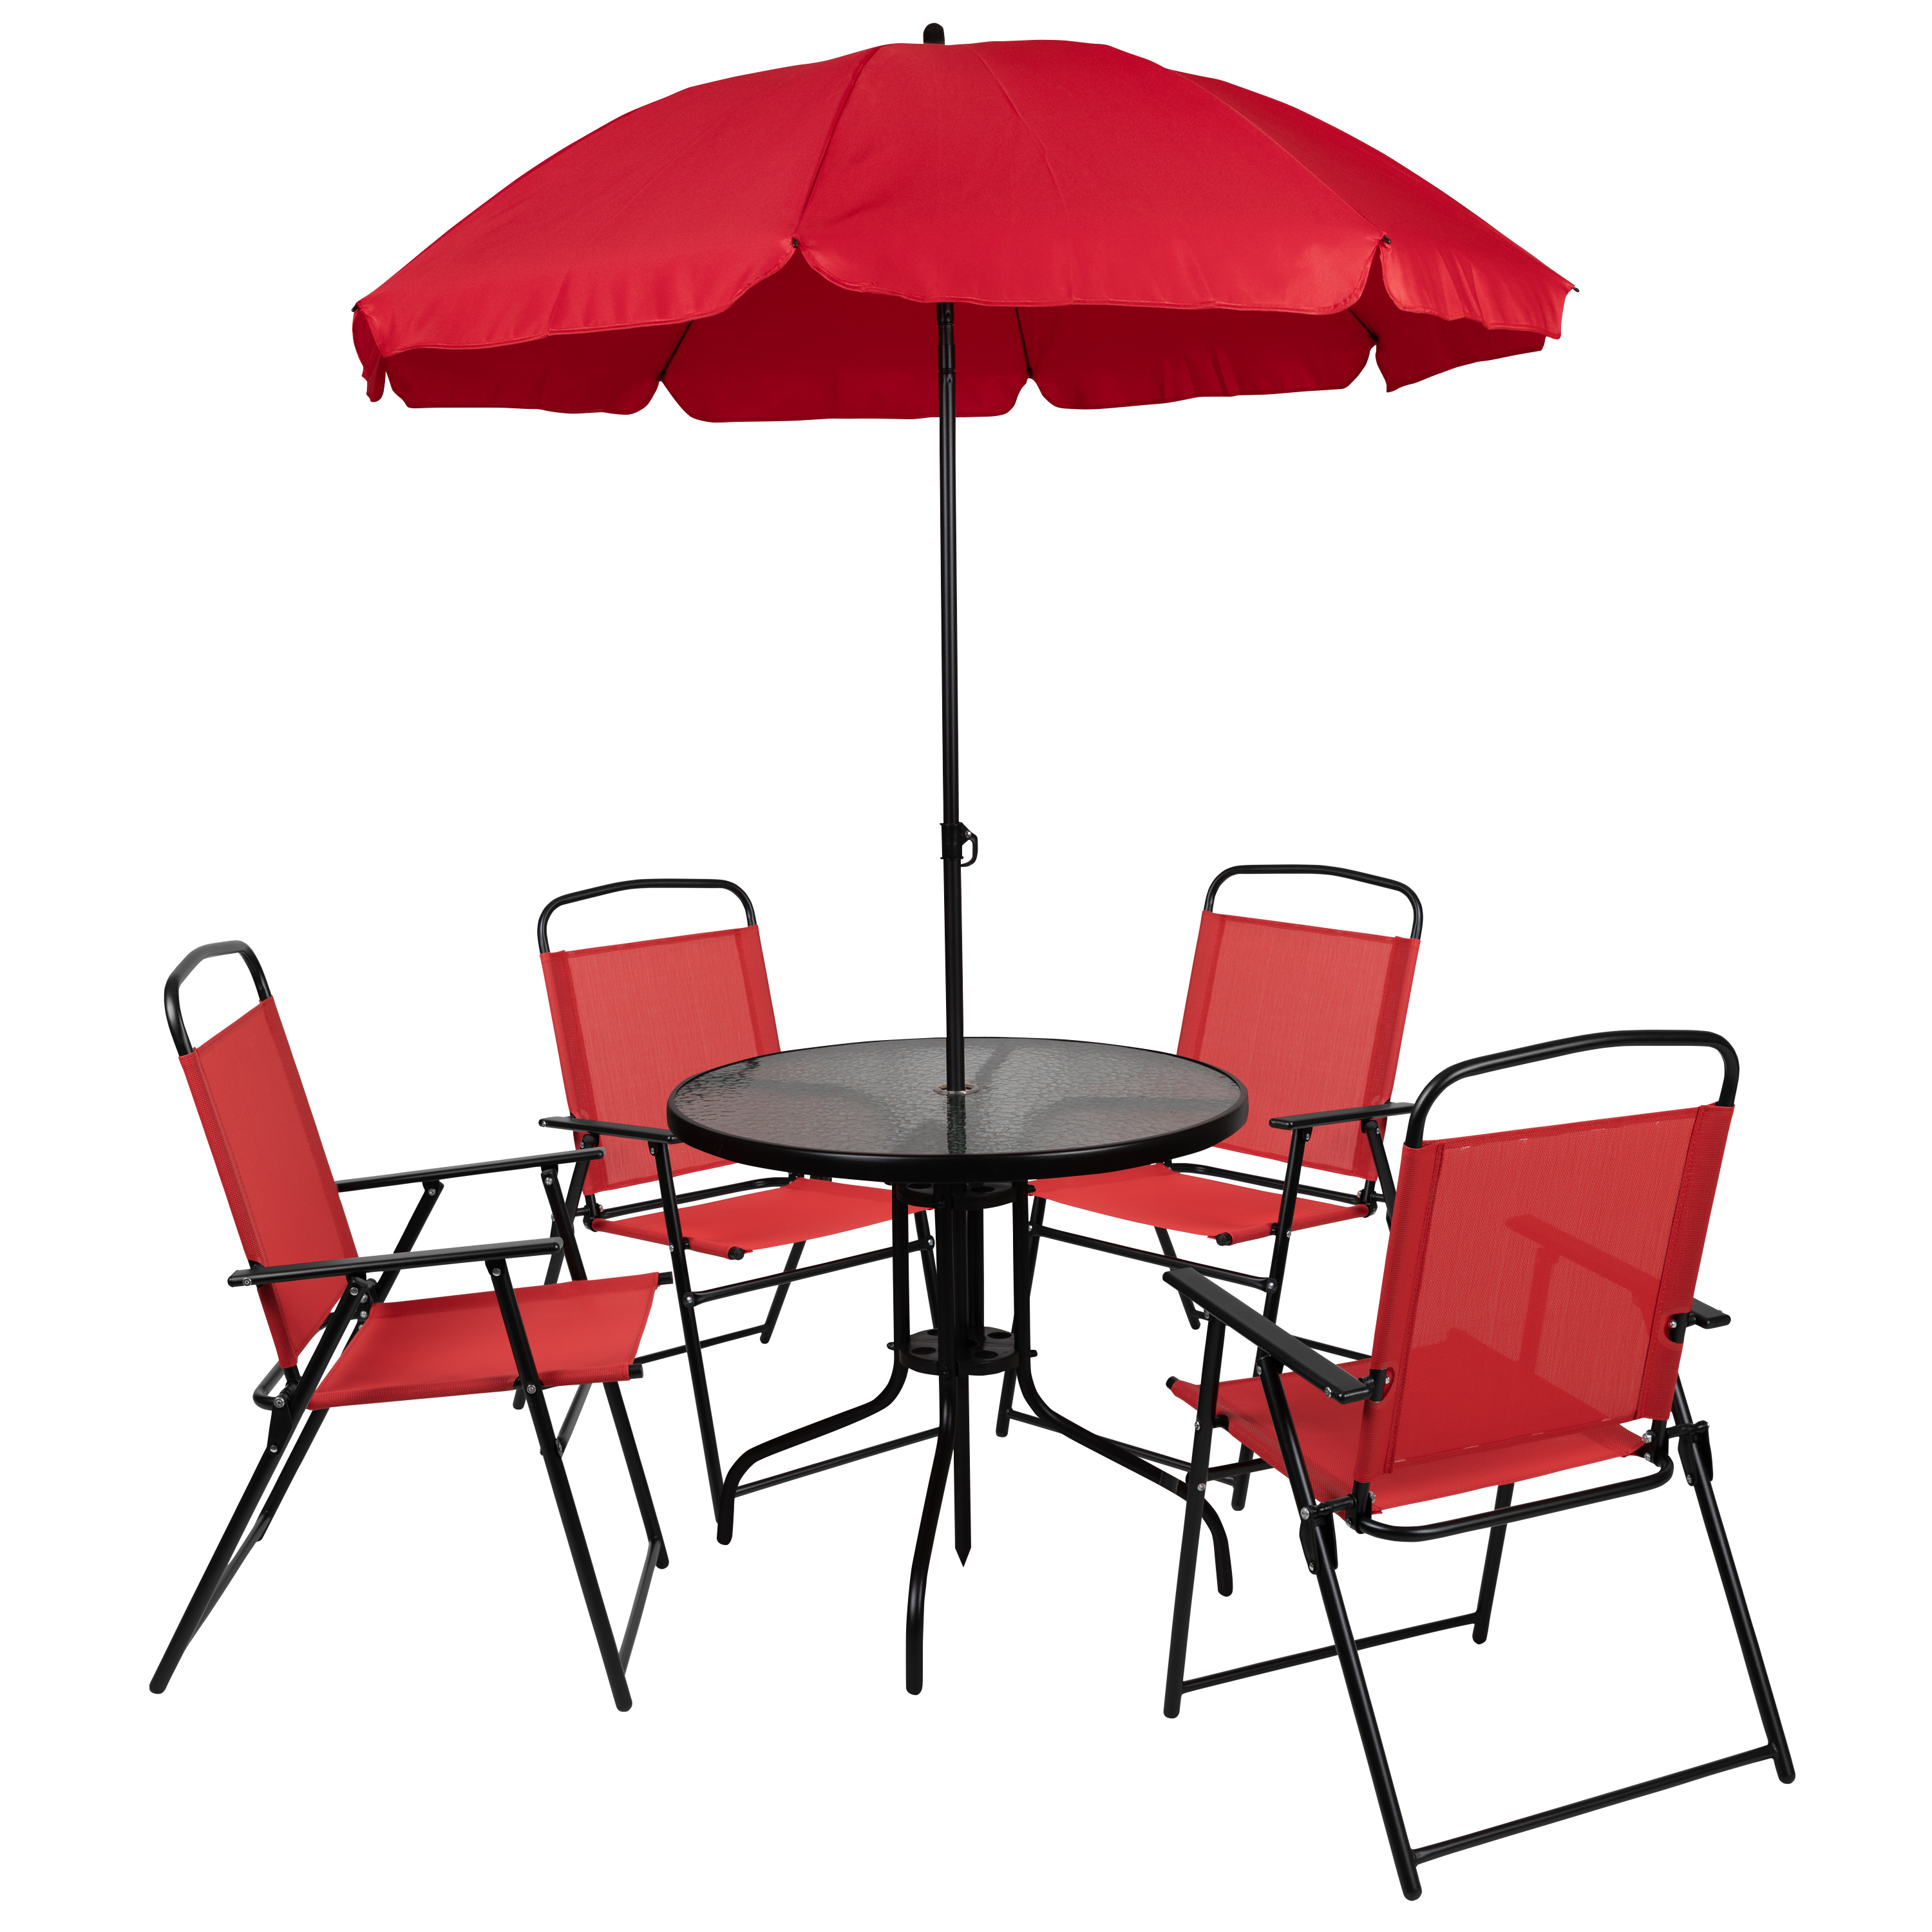 Flash Furniture GM-202012-RD-GG 6 Piece Red Patio Garden Set with Umbrella, Table and 4 Folding Chairs